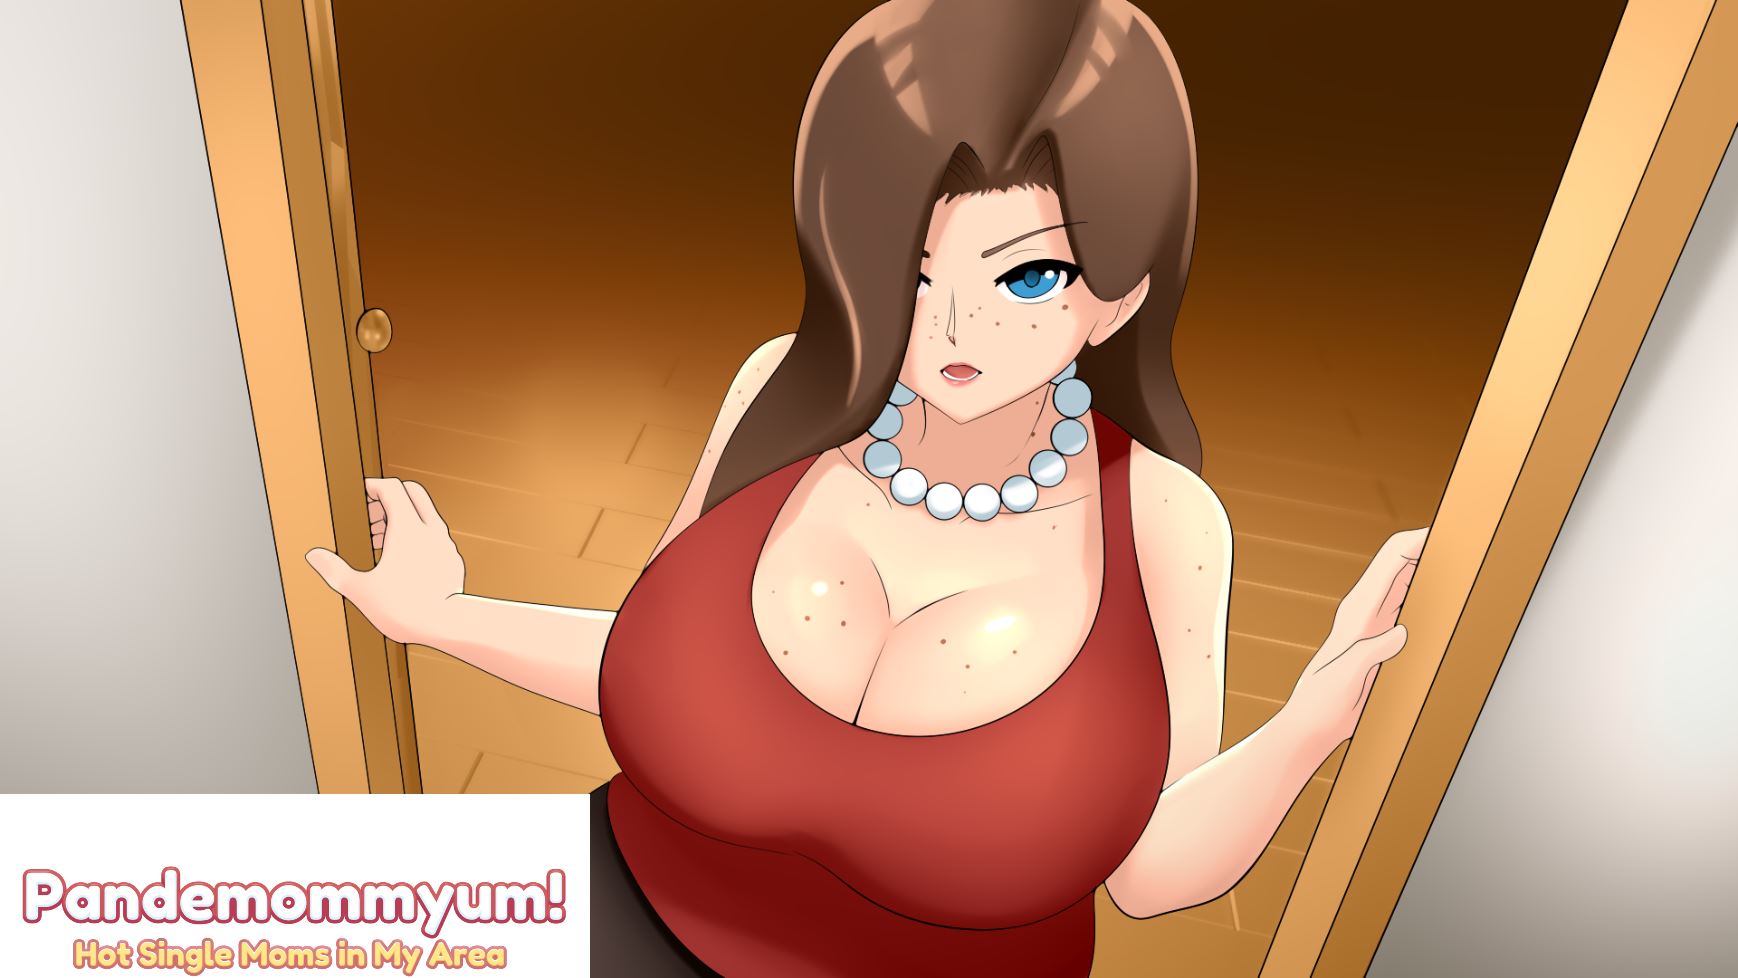 1738px x 978px - Pandemommyum Ren'Py Porn Sex Game v.3.0 Download for Windows, MacOS, Linux,  Android